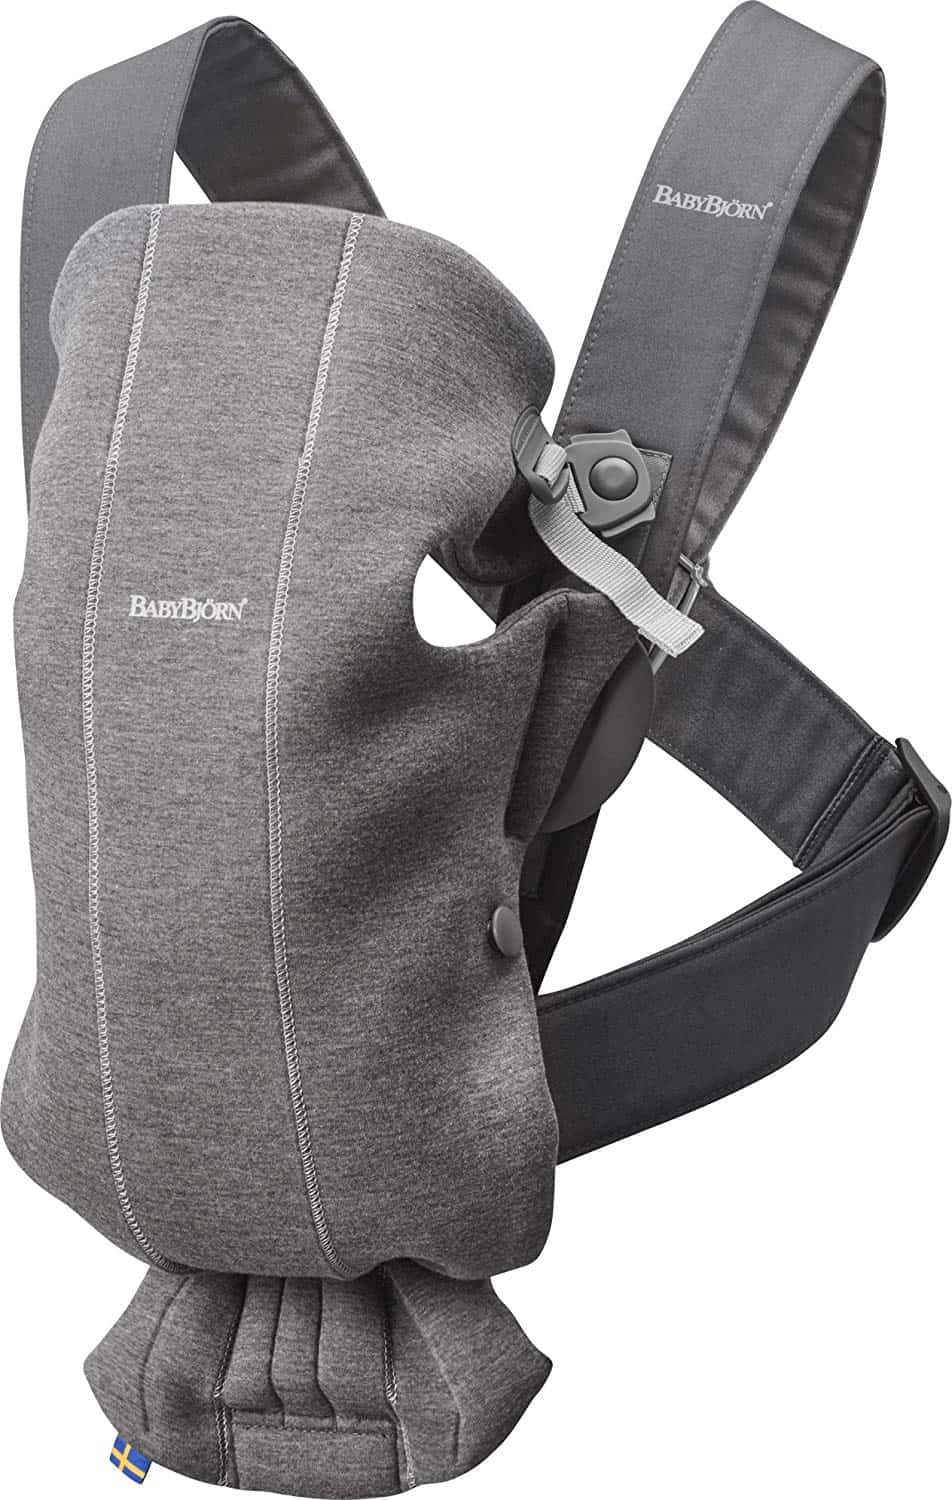 babybjorn active baby carrier review